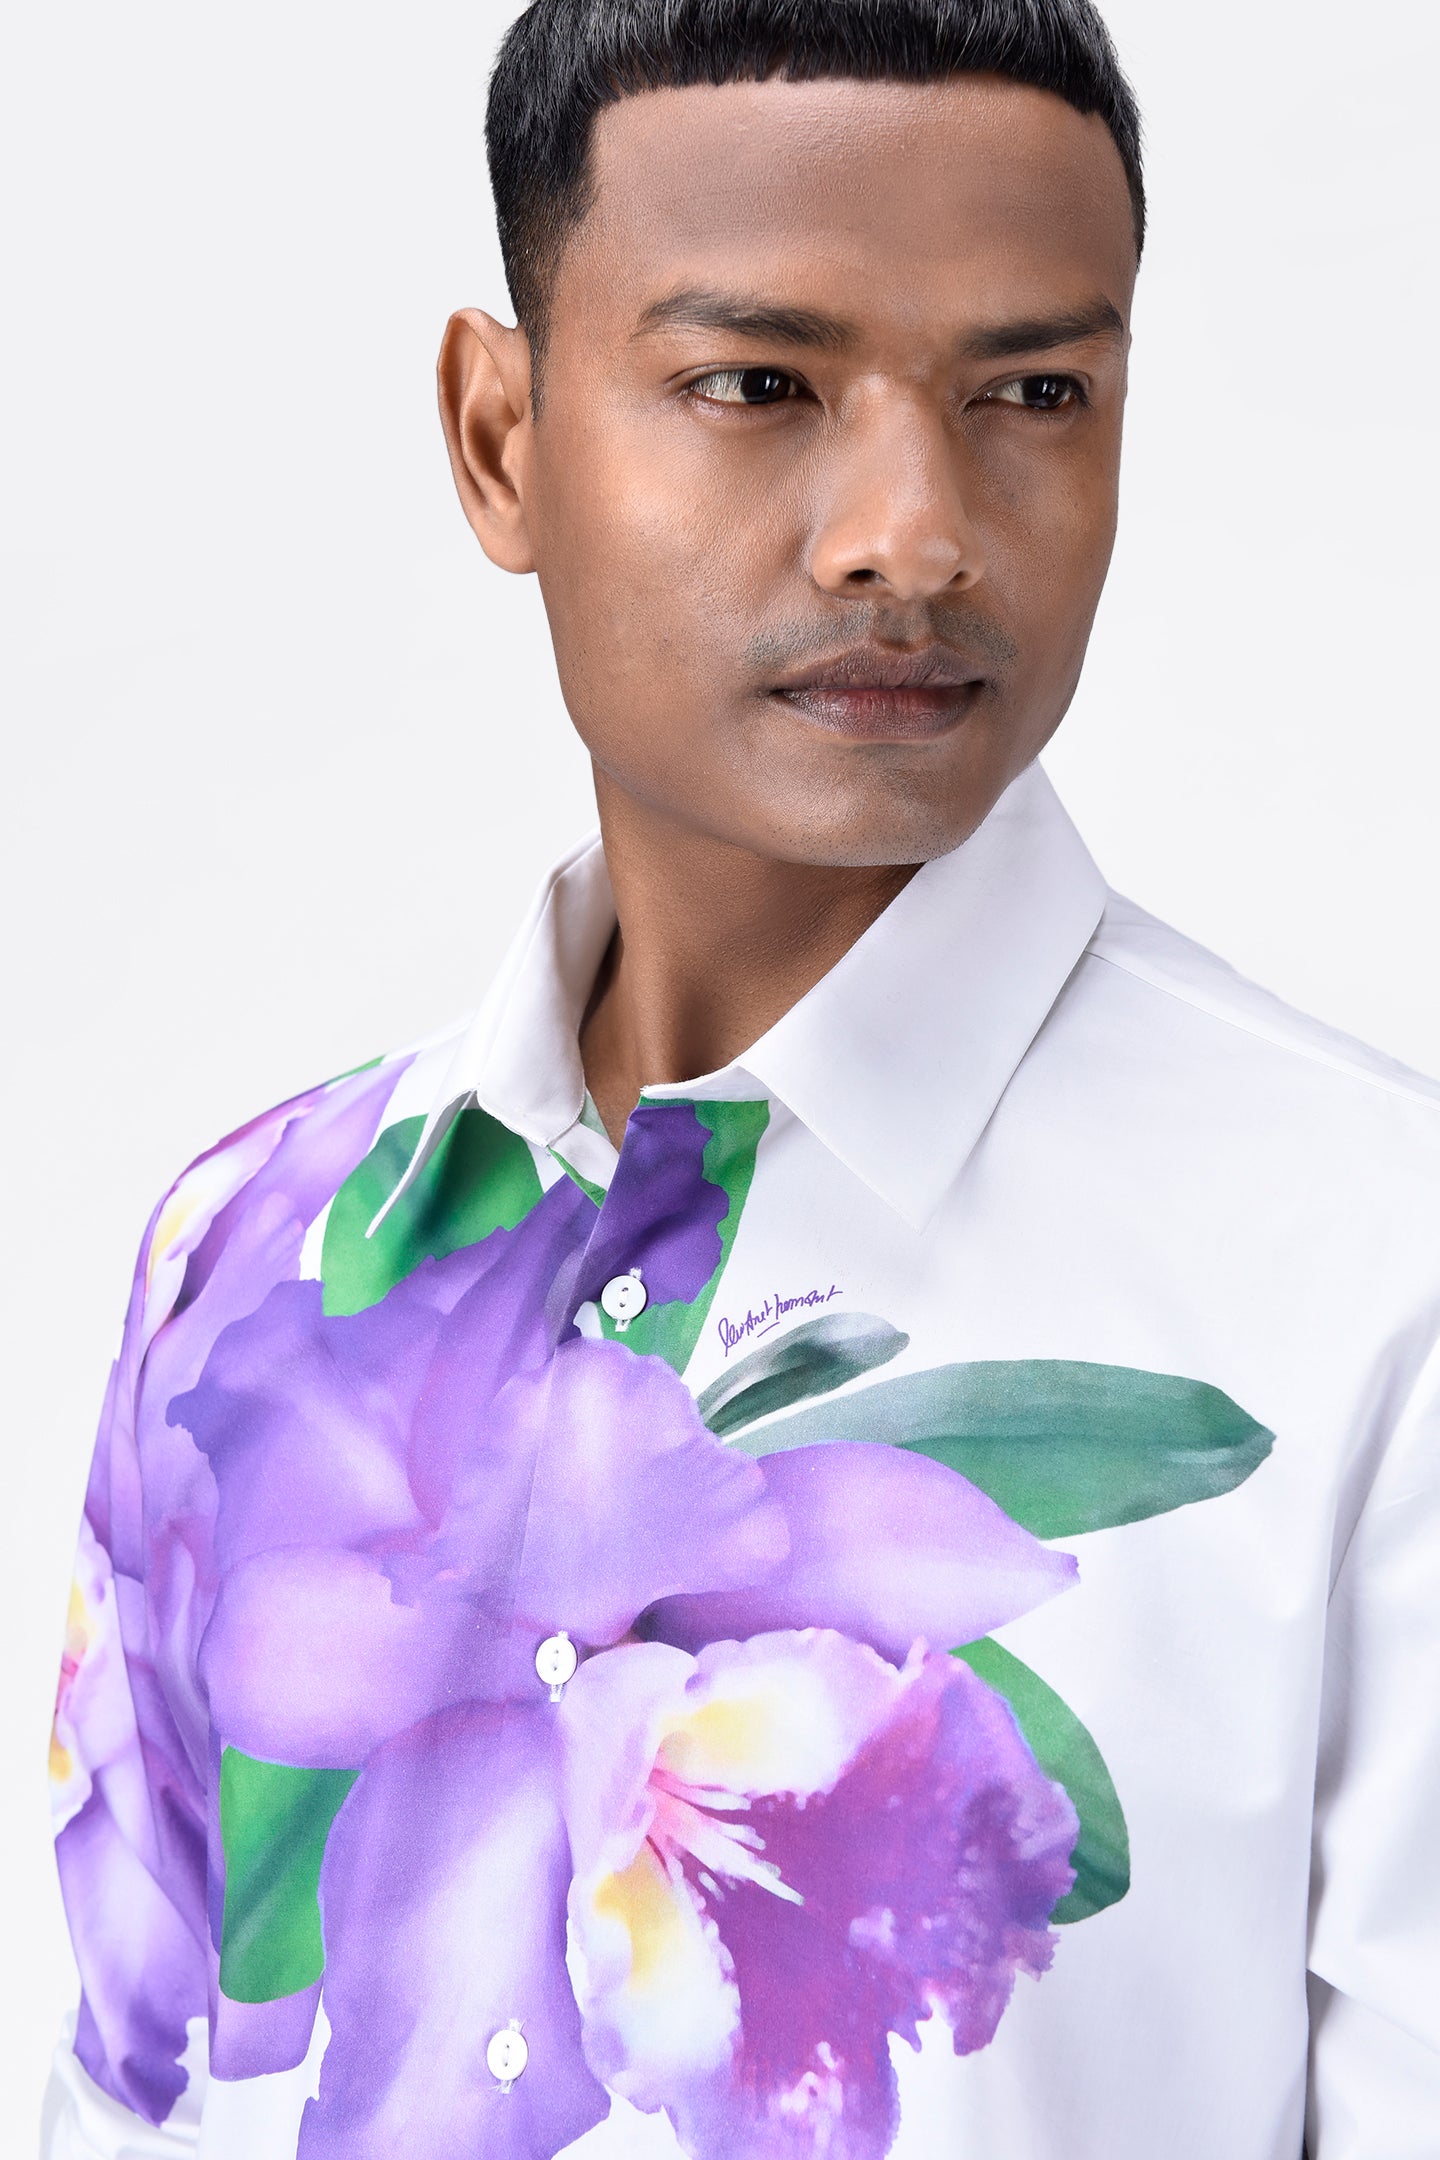 Regular Fit Men's Button-Down Shirt With Orchid Floral Print Placement